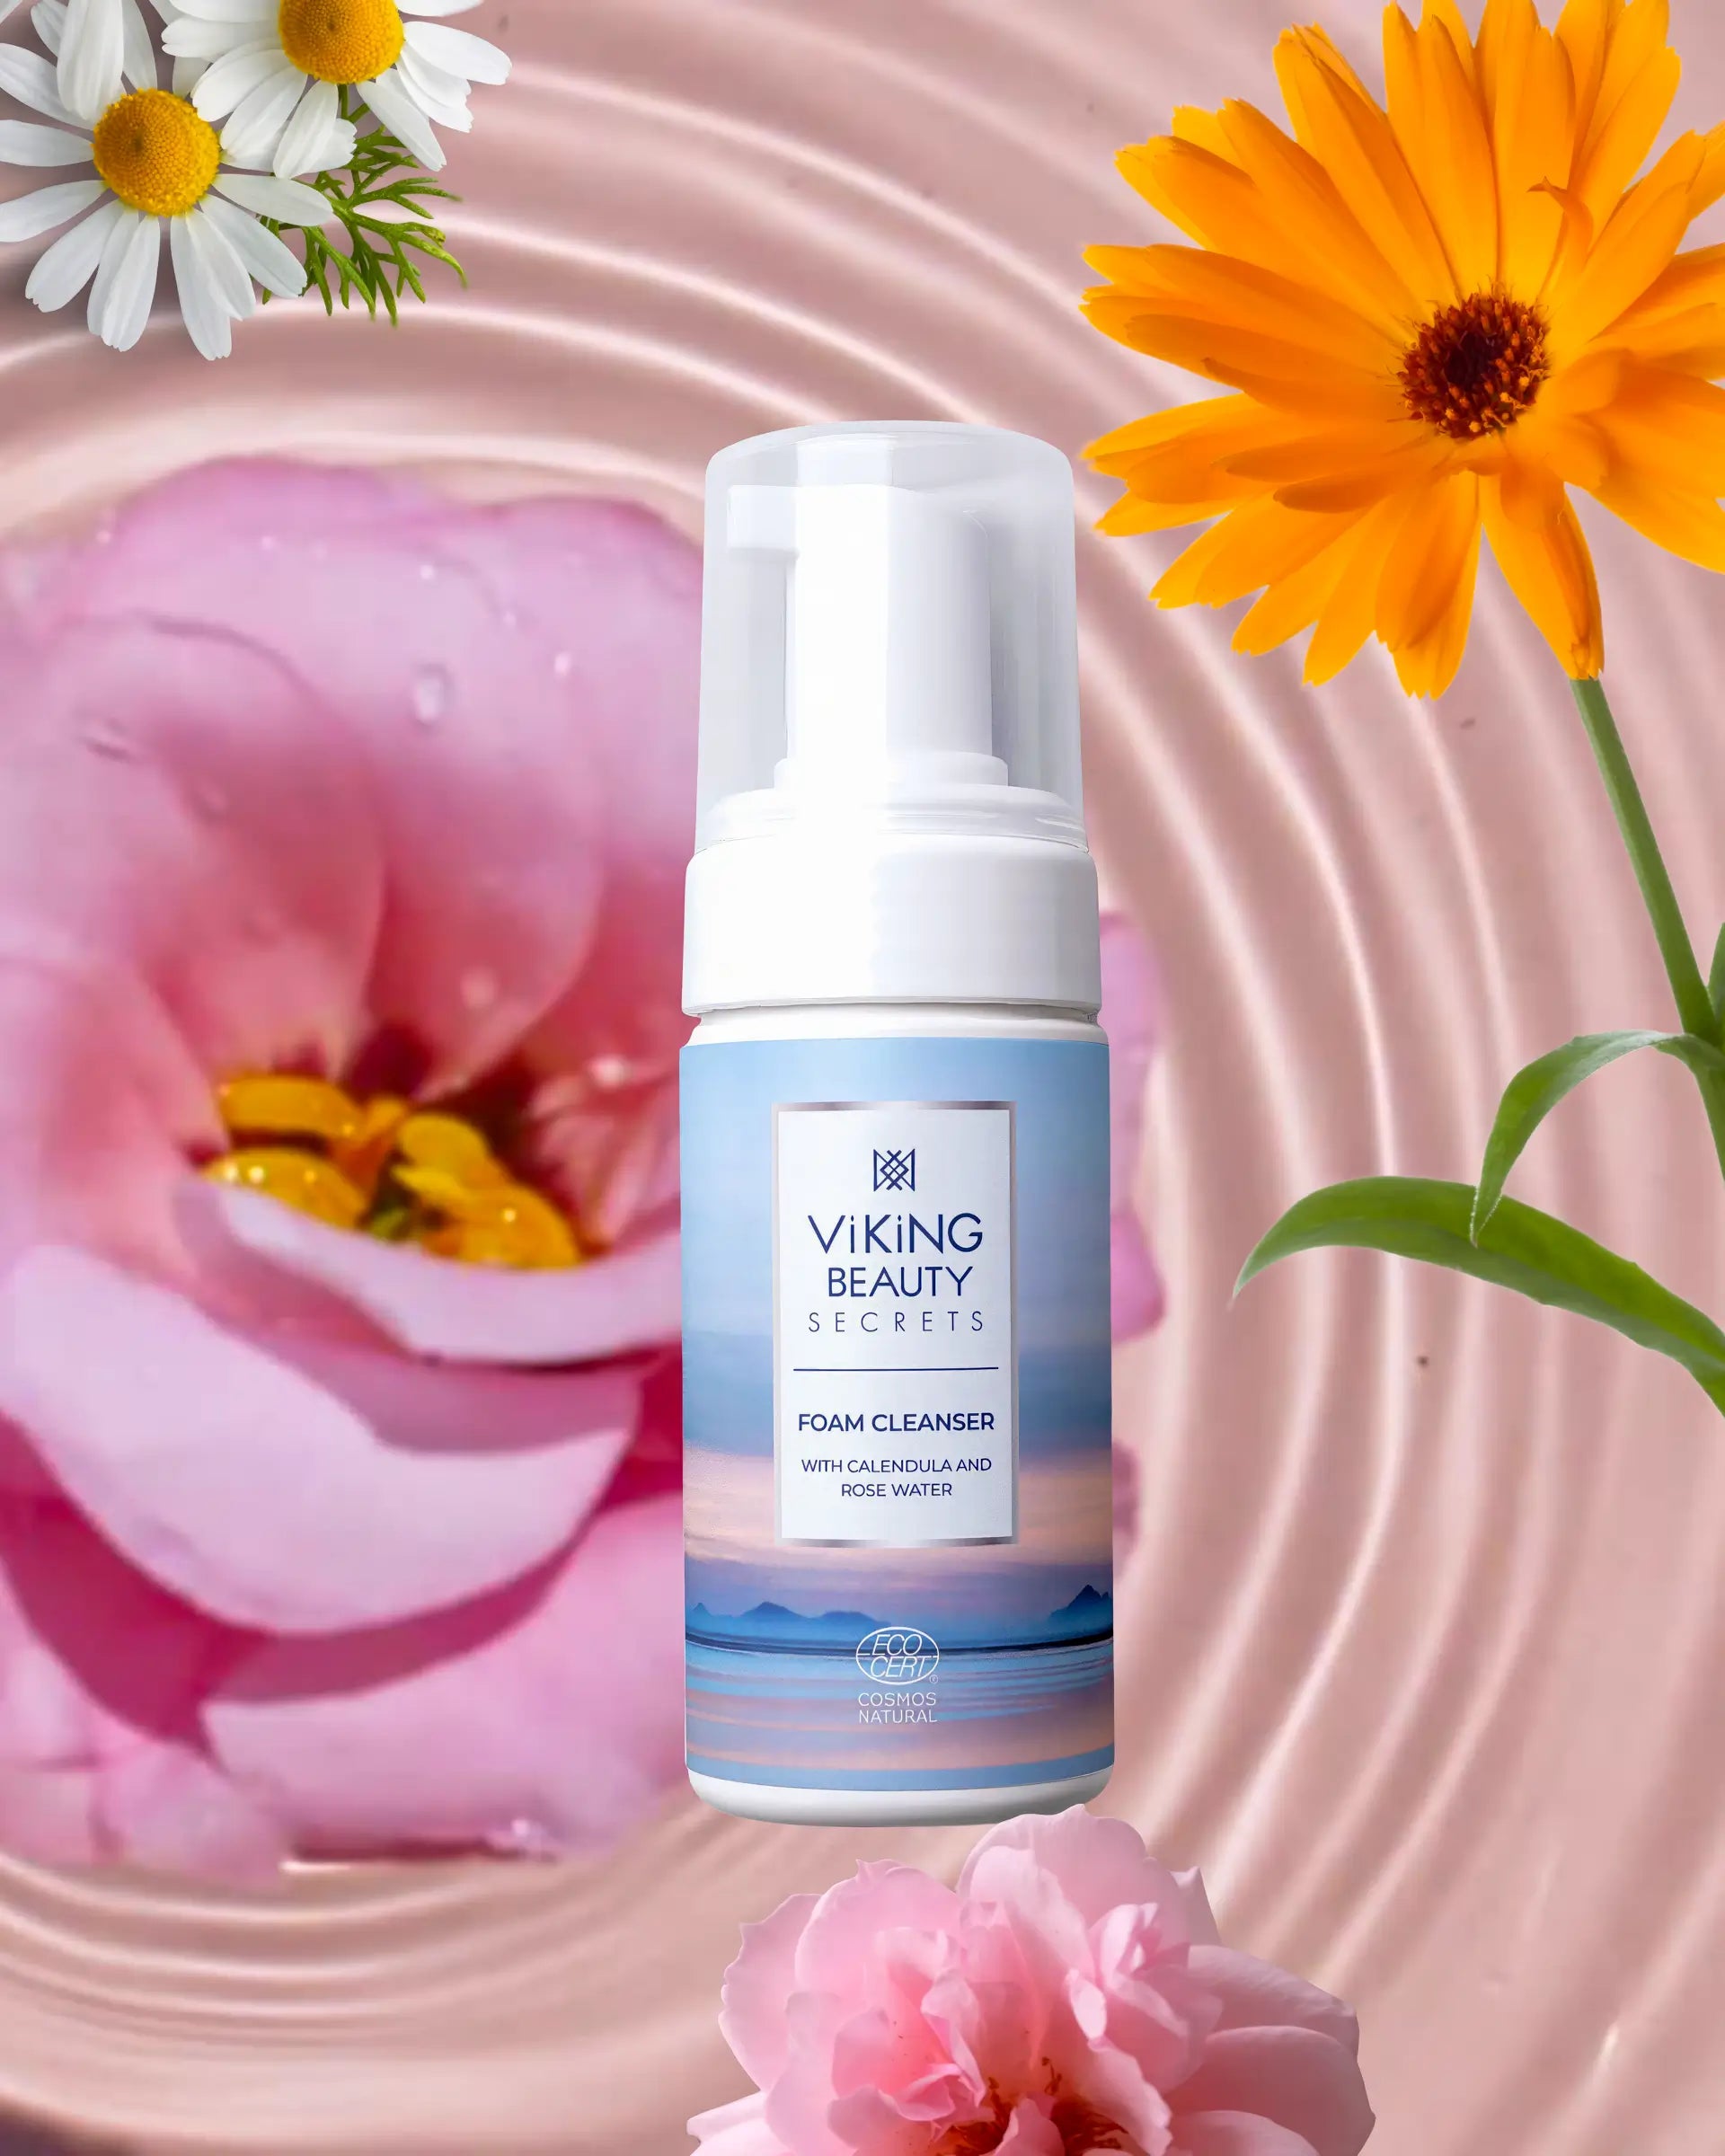 Foam Cleanser with Calendula and Rose Water